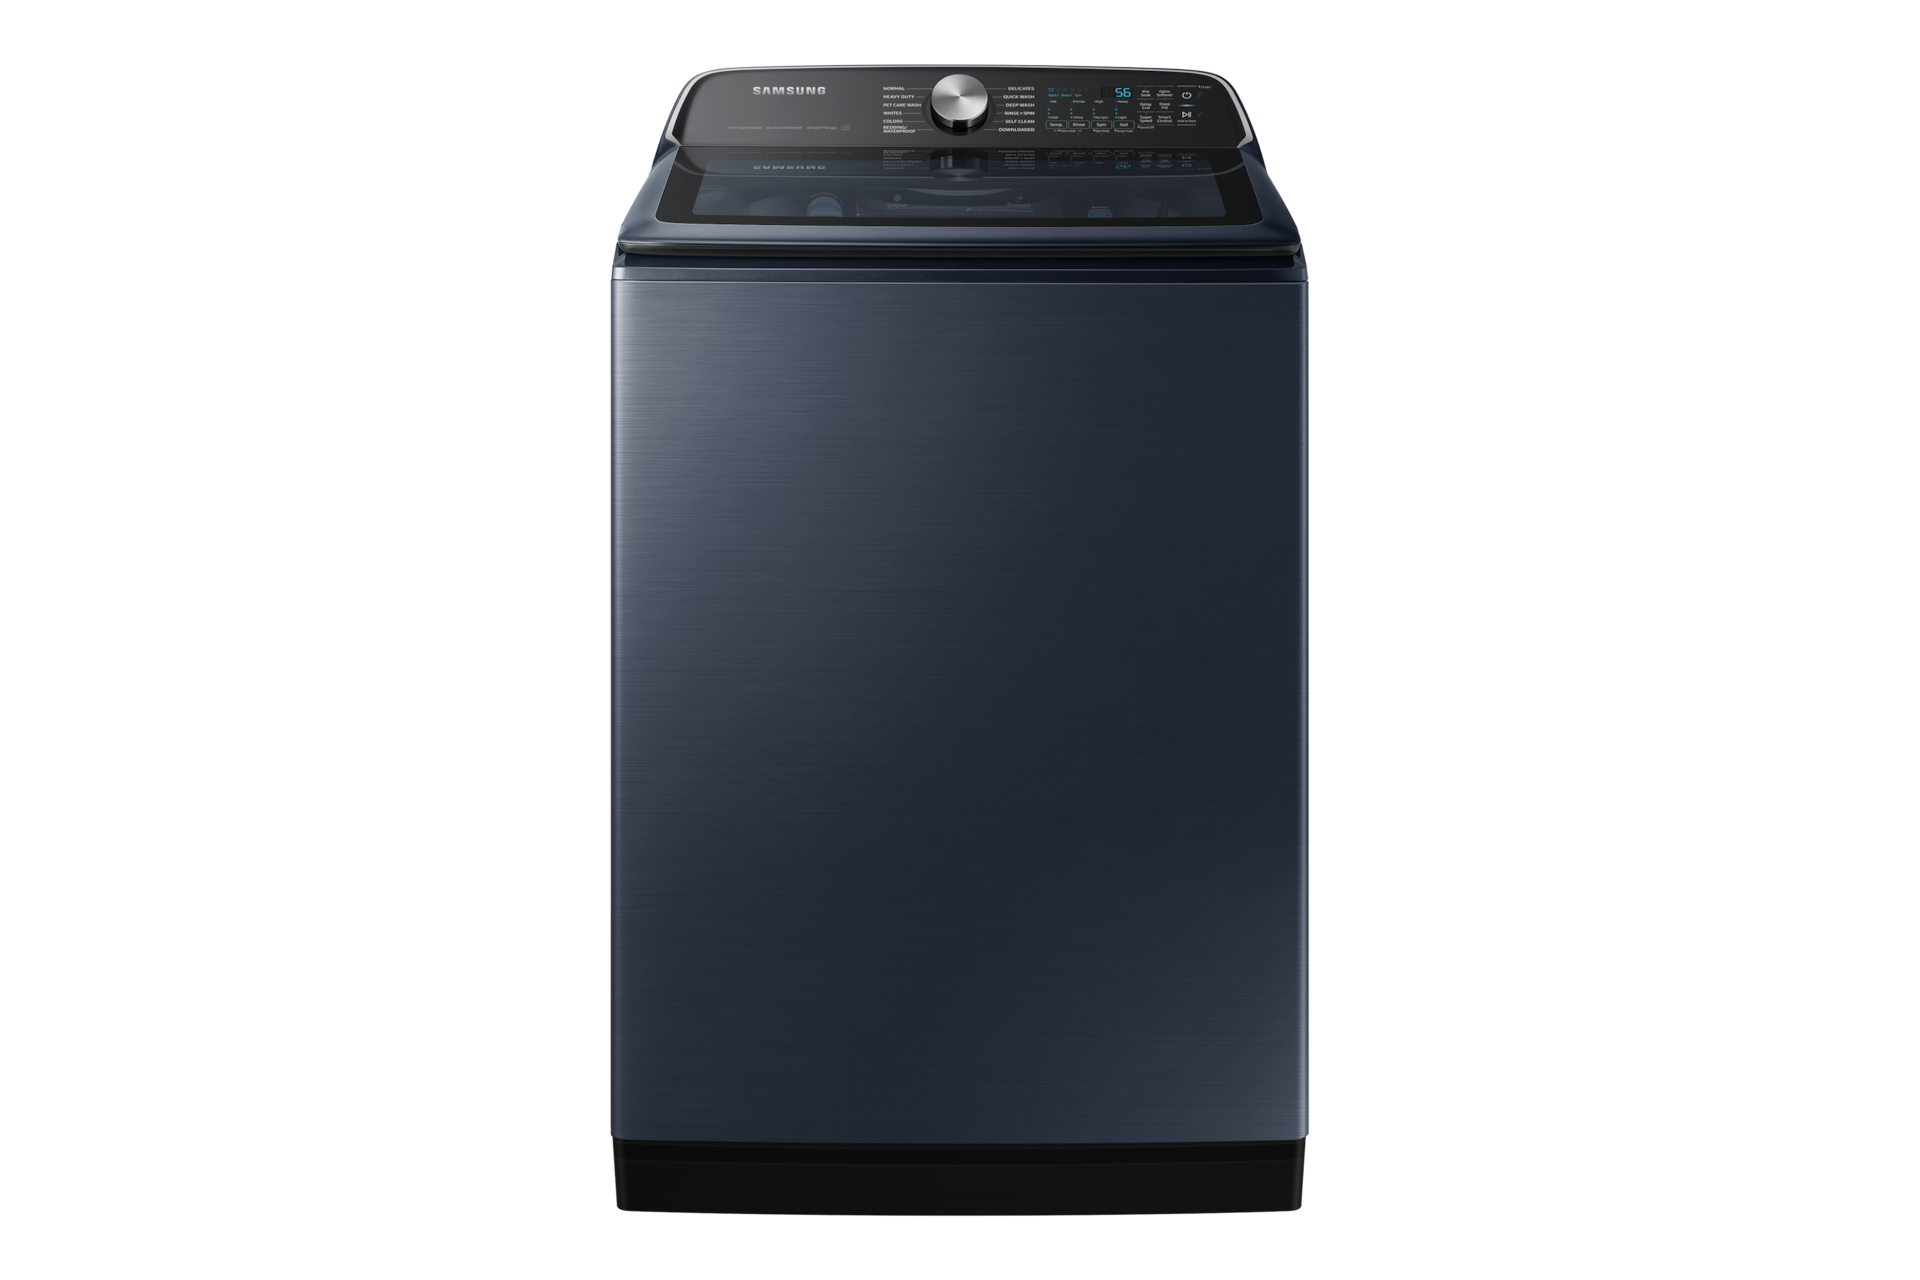 Image of Samsung 6.1 cu. ft. 7155 Series Top Load Washer with Pet Care Solution